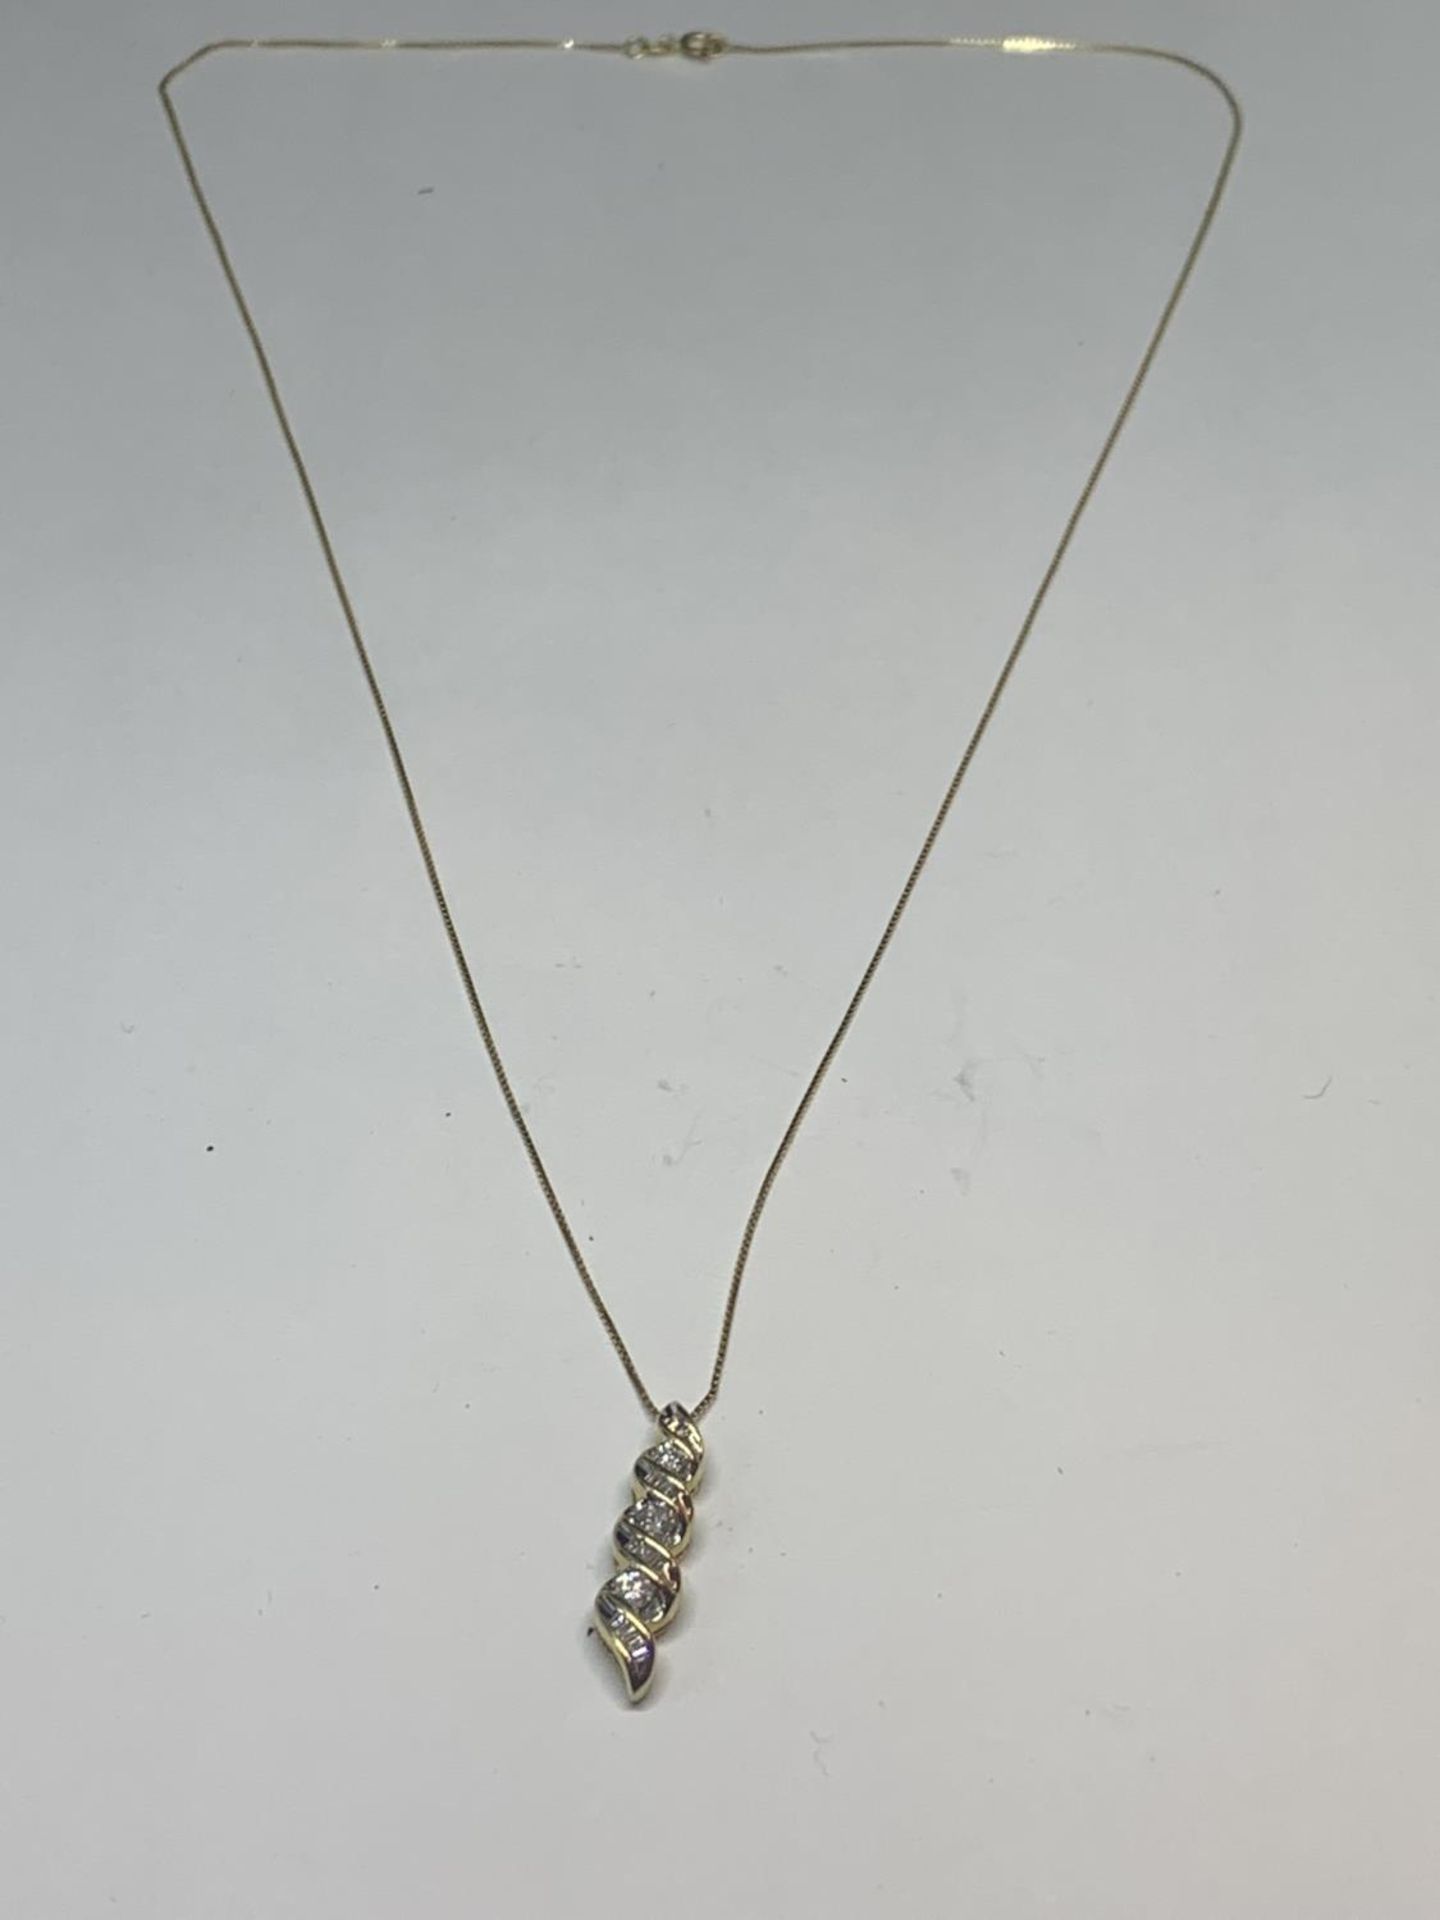 A 14 CARAT GOLD DROP PENDANT WITH APPROXIMATELY 1 CARAT OF DIAMONDS CHAIN LENGTH 45CM - Image 3 of 6